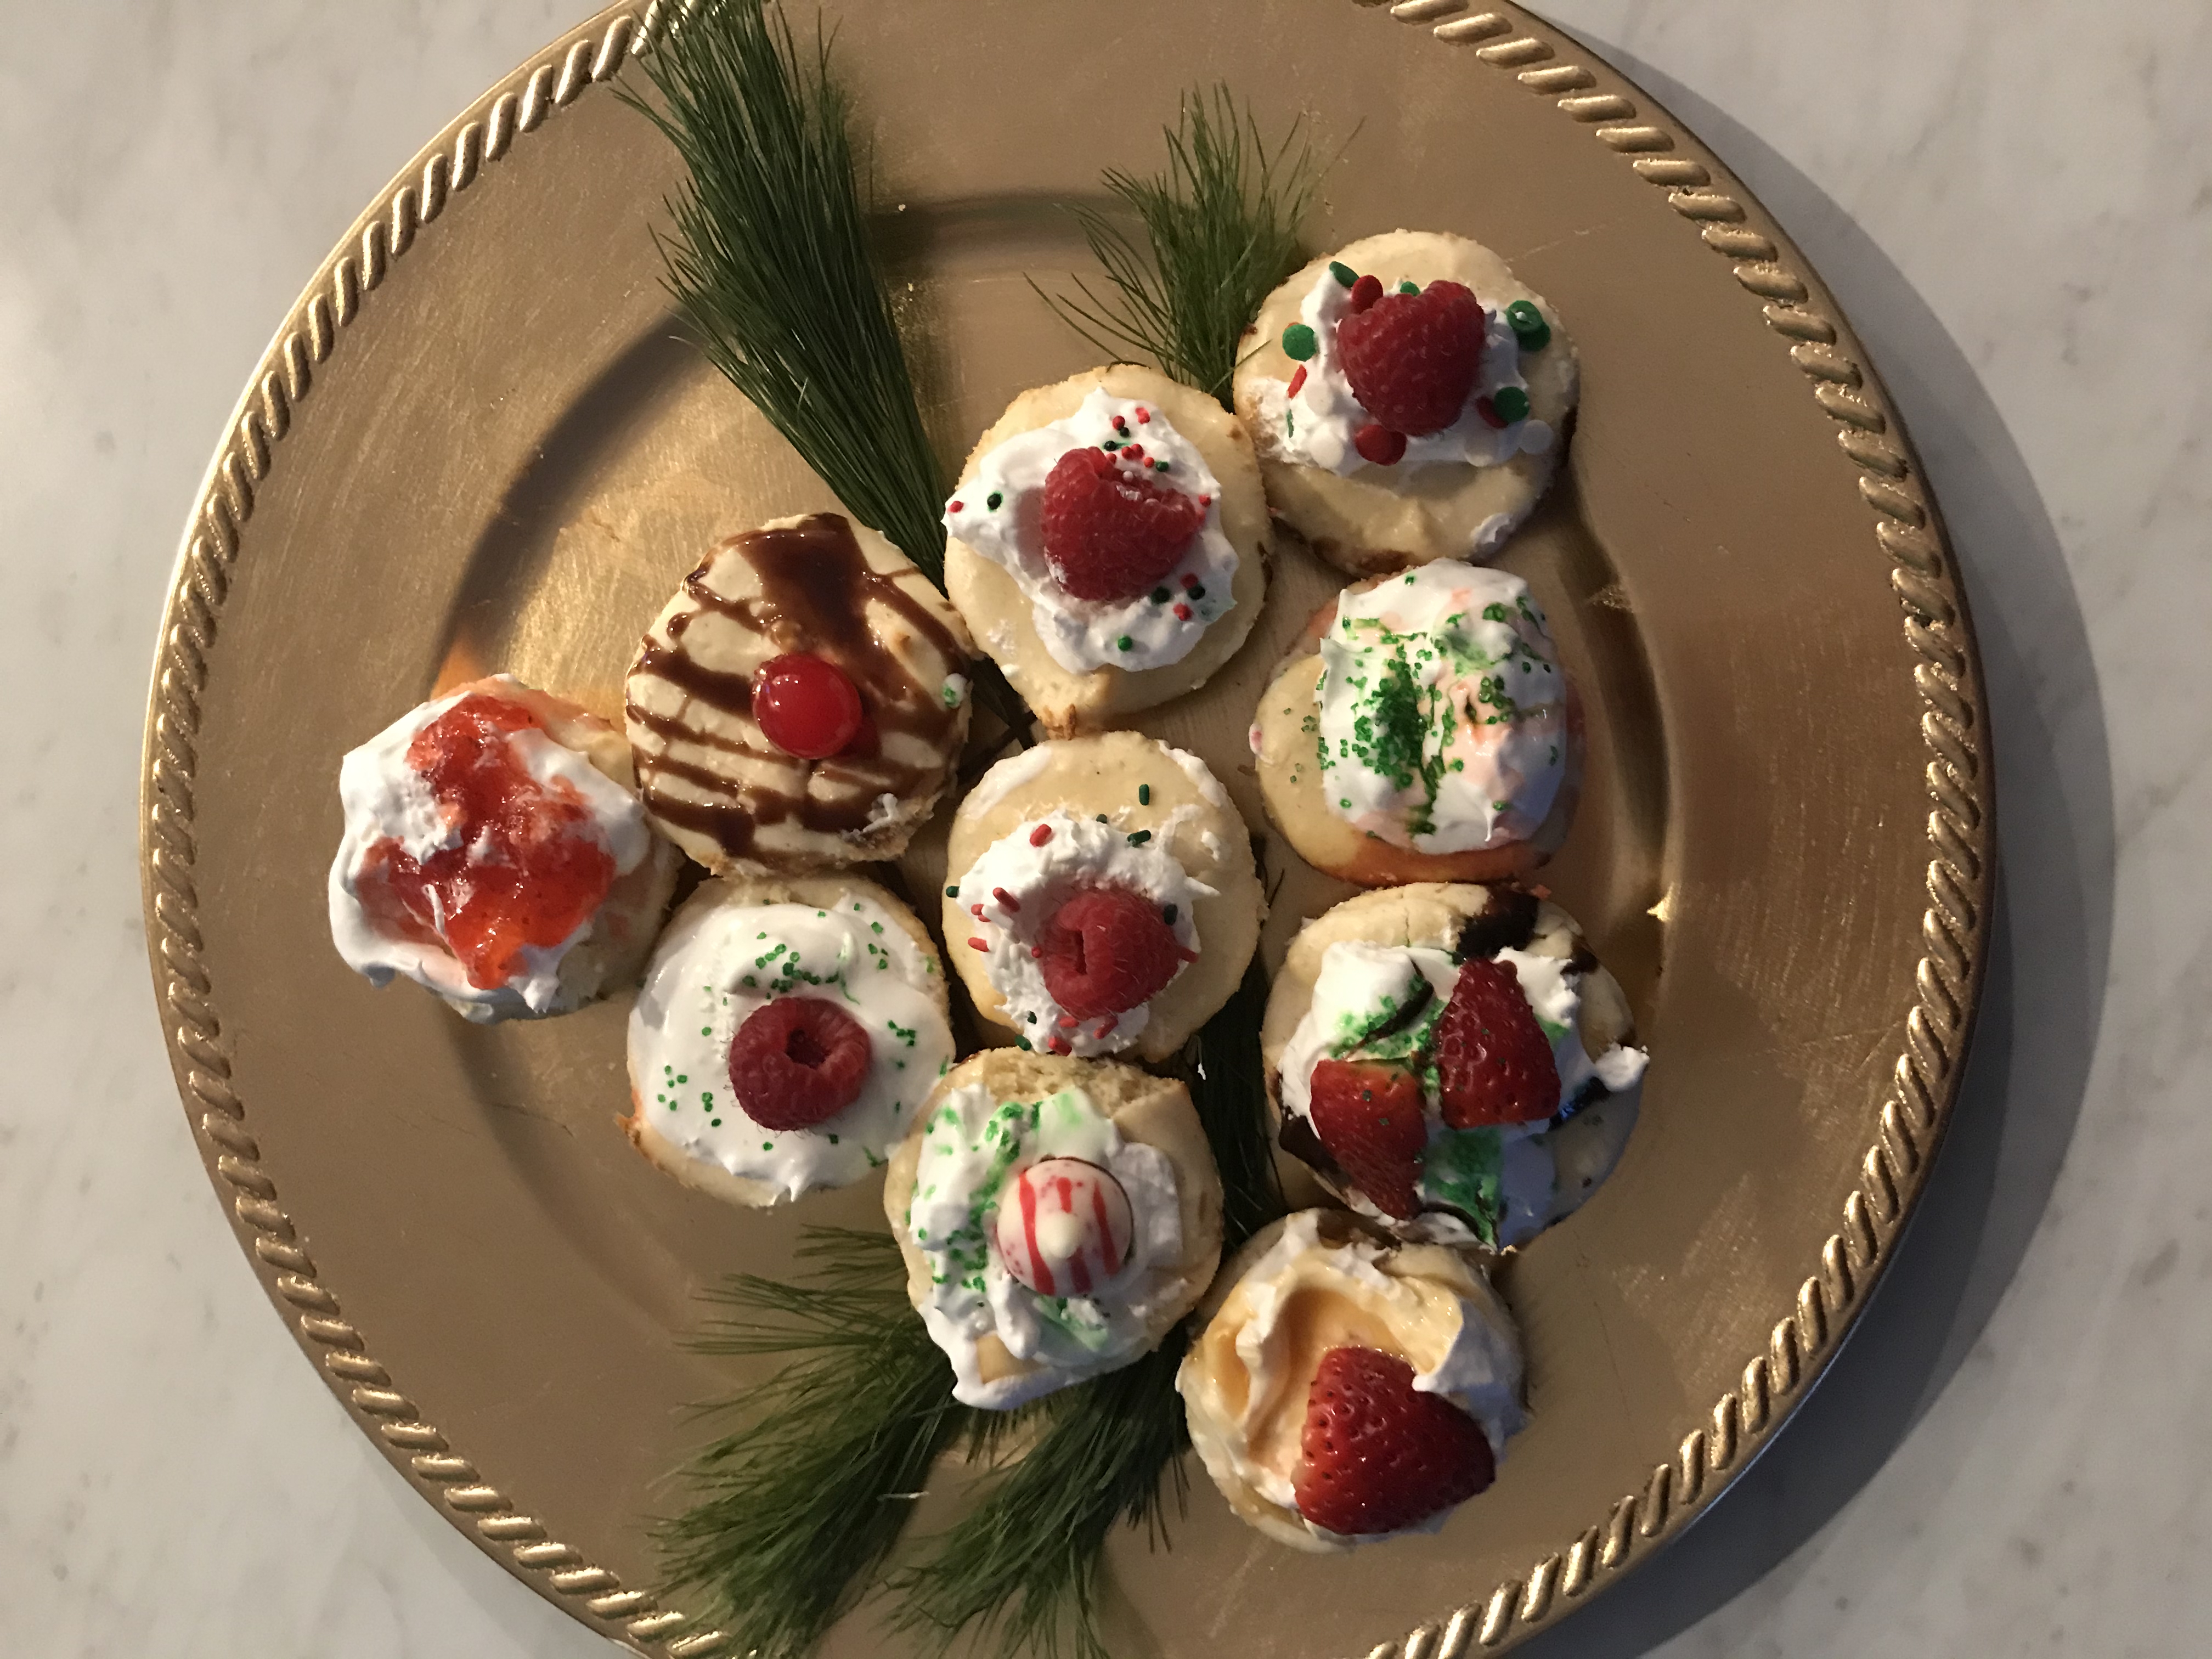 Plate of iced Christmas cookies